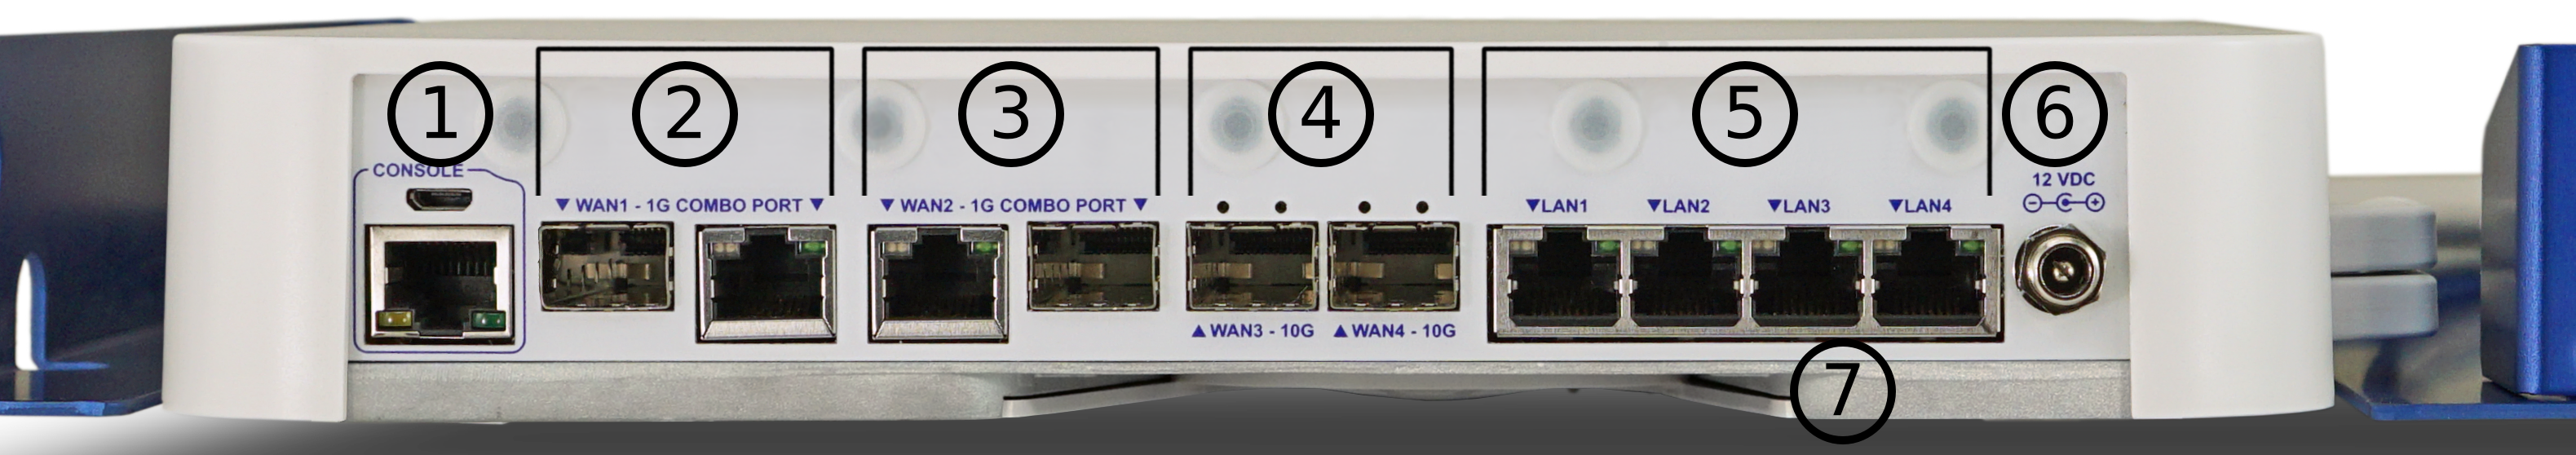 Front view of the Netgate 8200 Secure Router ports